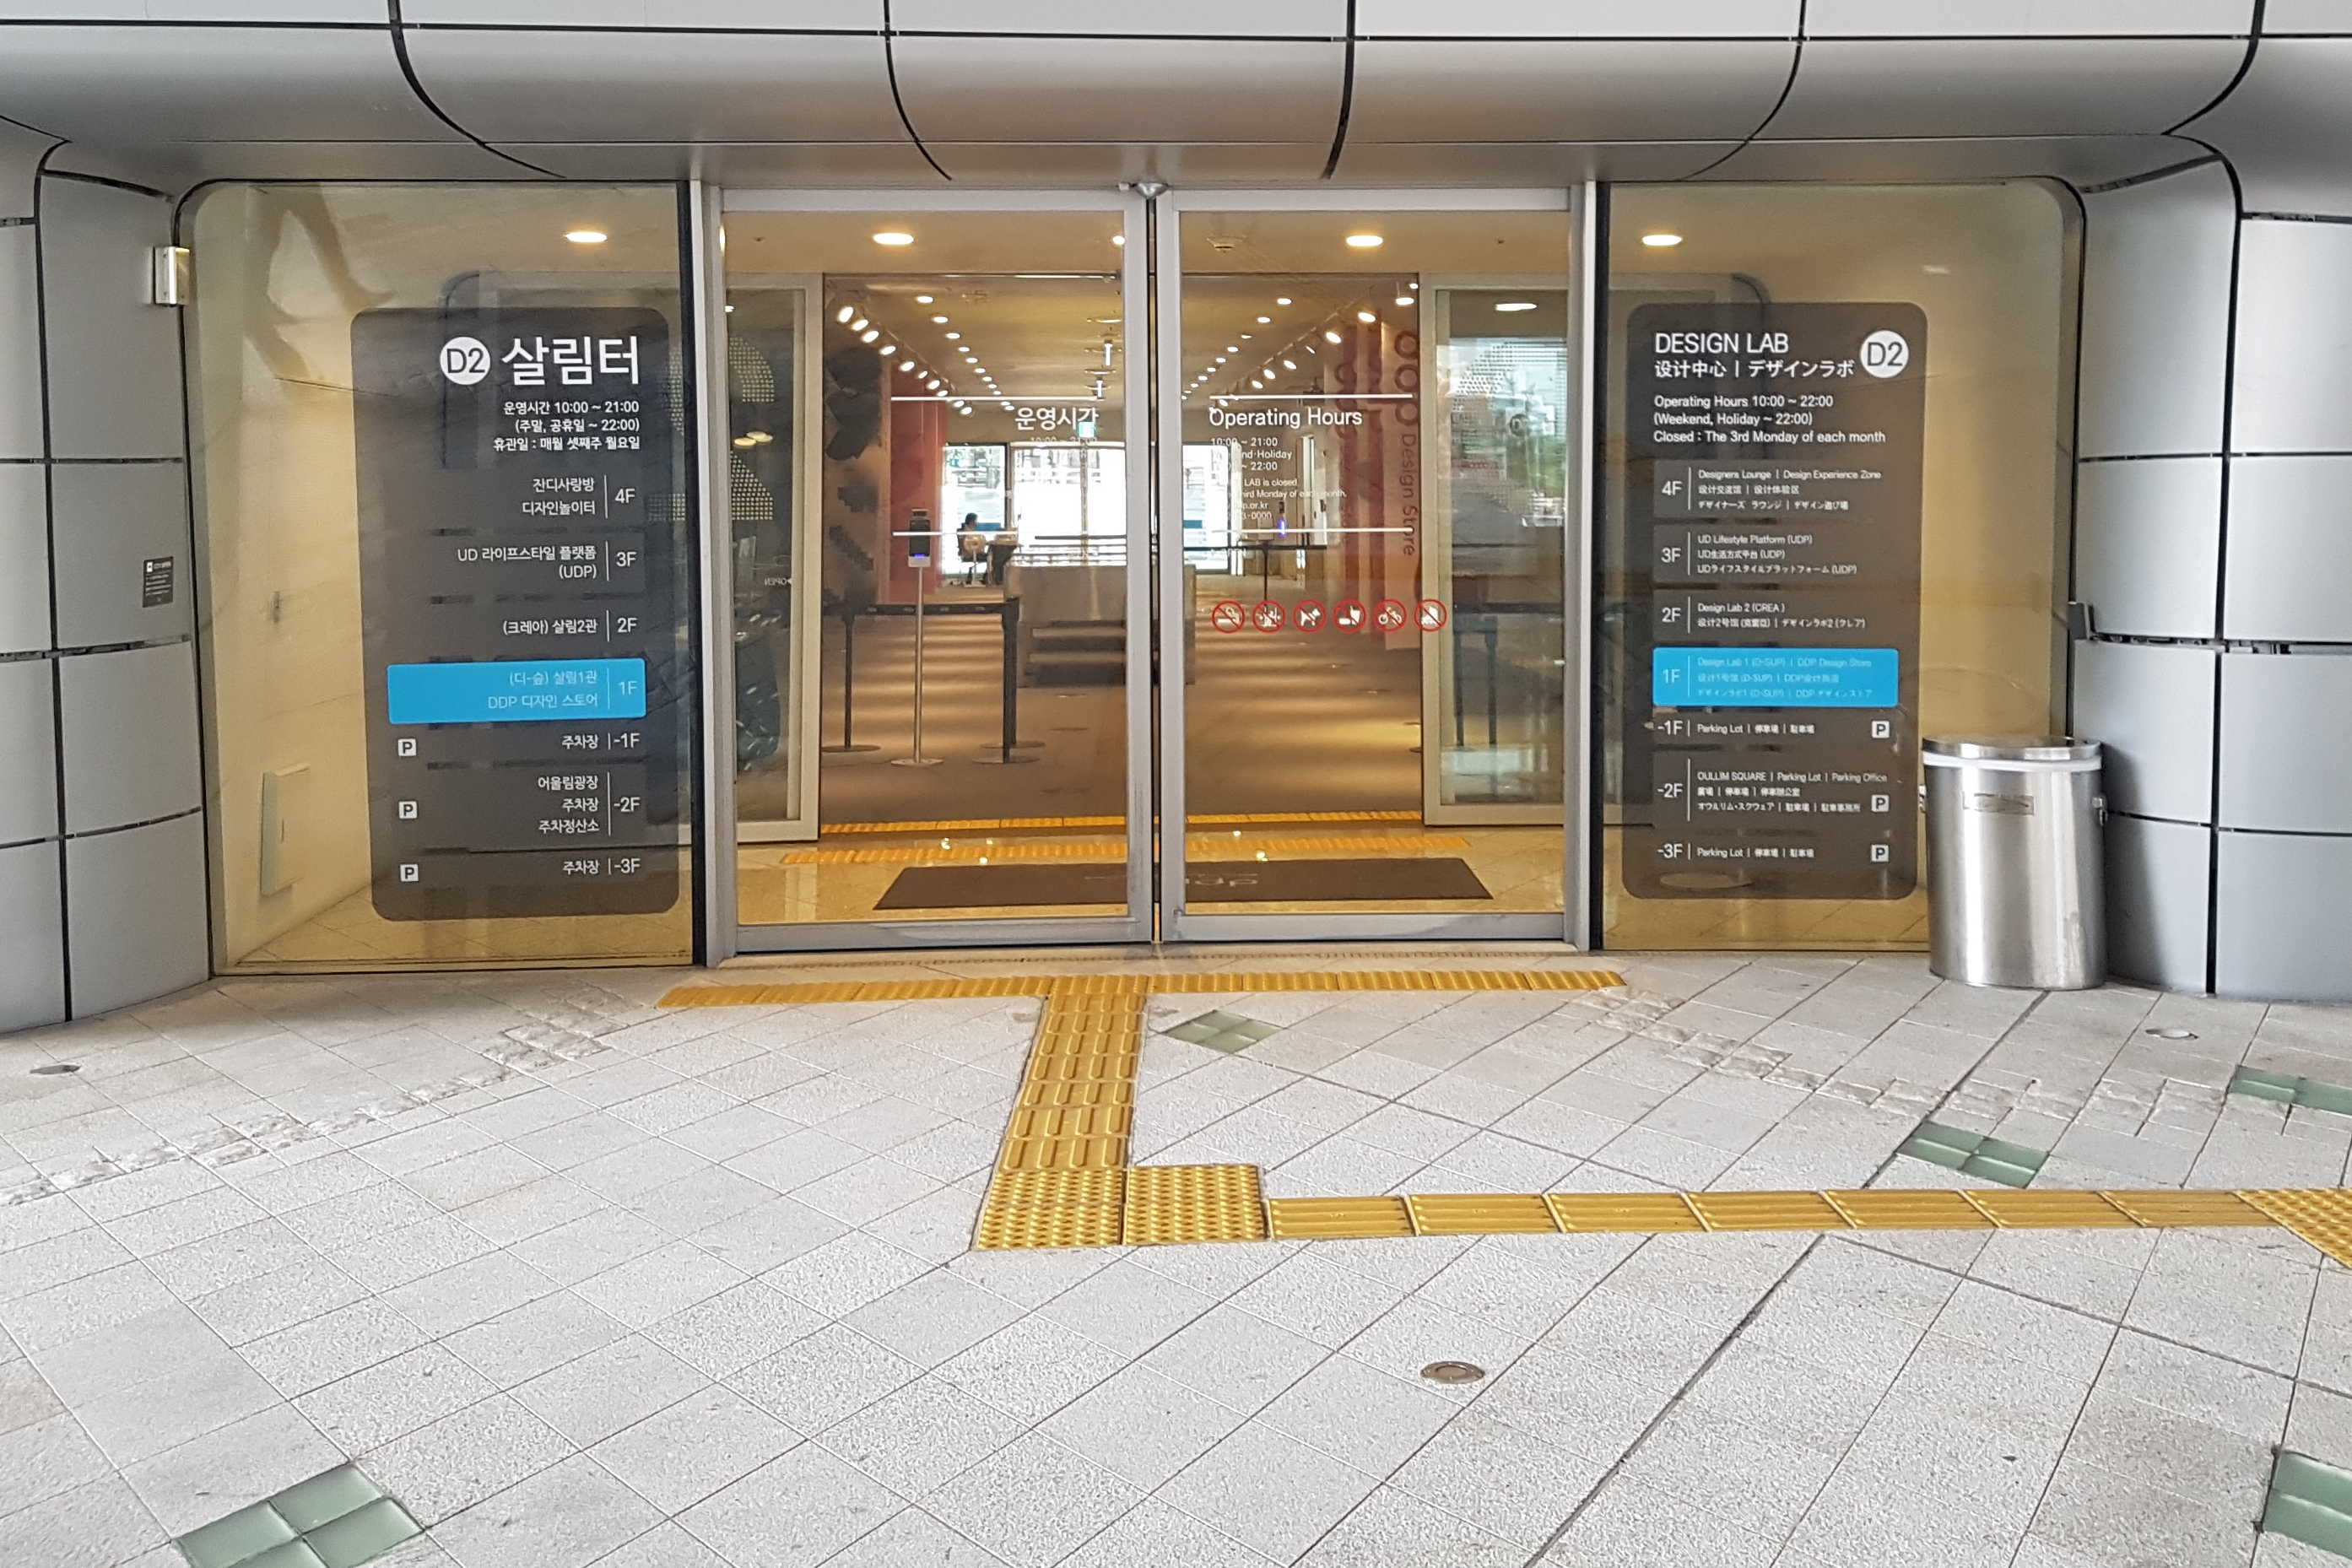 Entryway/ Main entrance0 : The main entrance with tactile paving and automatic doors